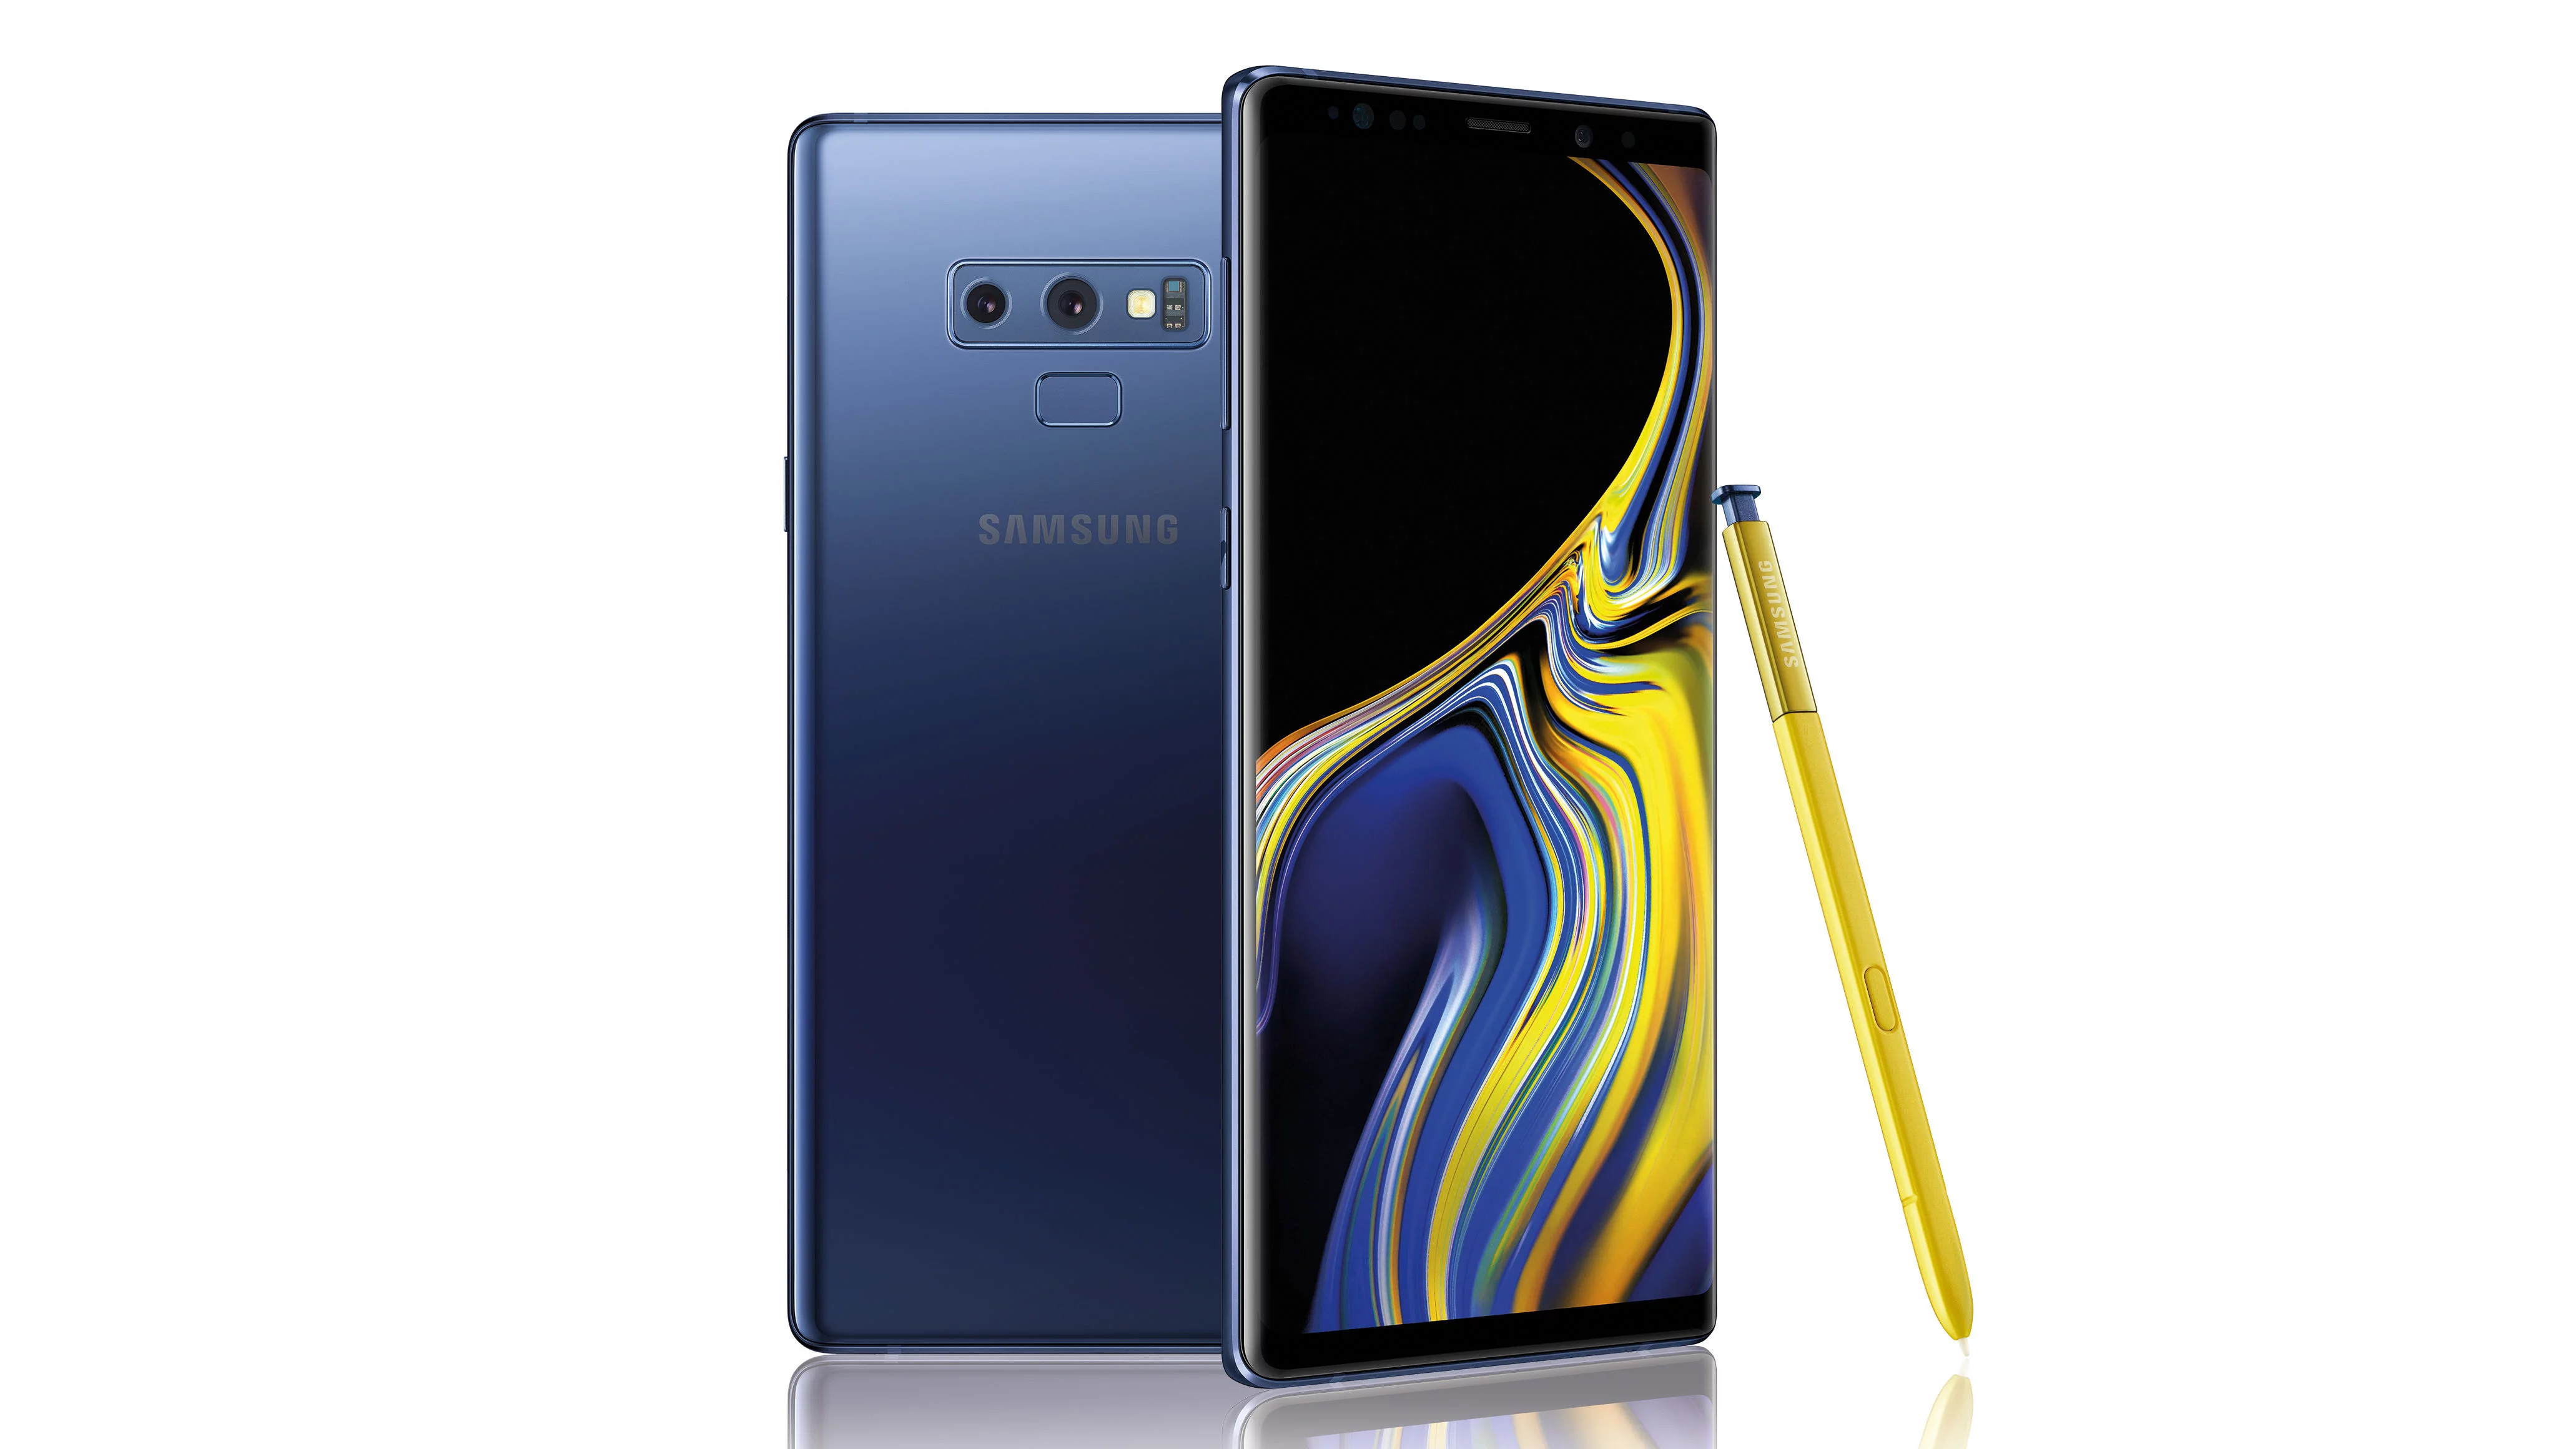 Samsung Galaxy Note 9: Samsung Upped Its Game!